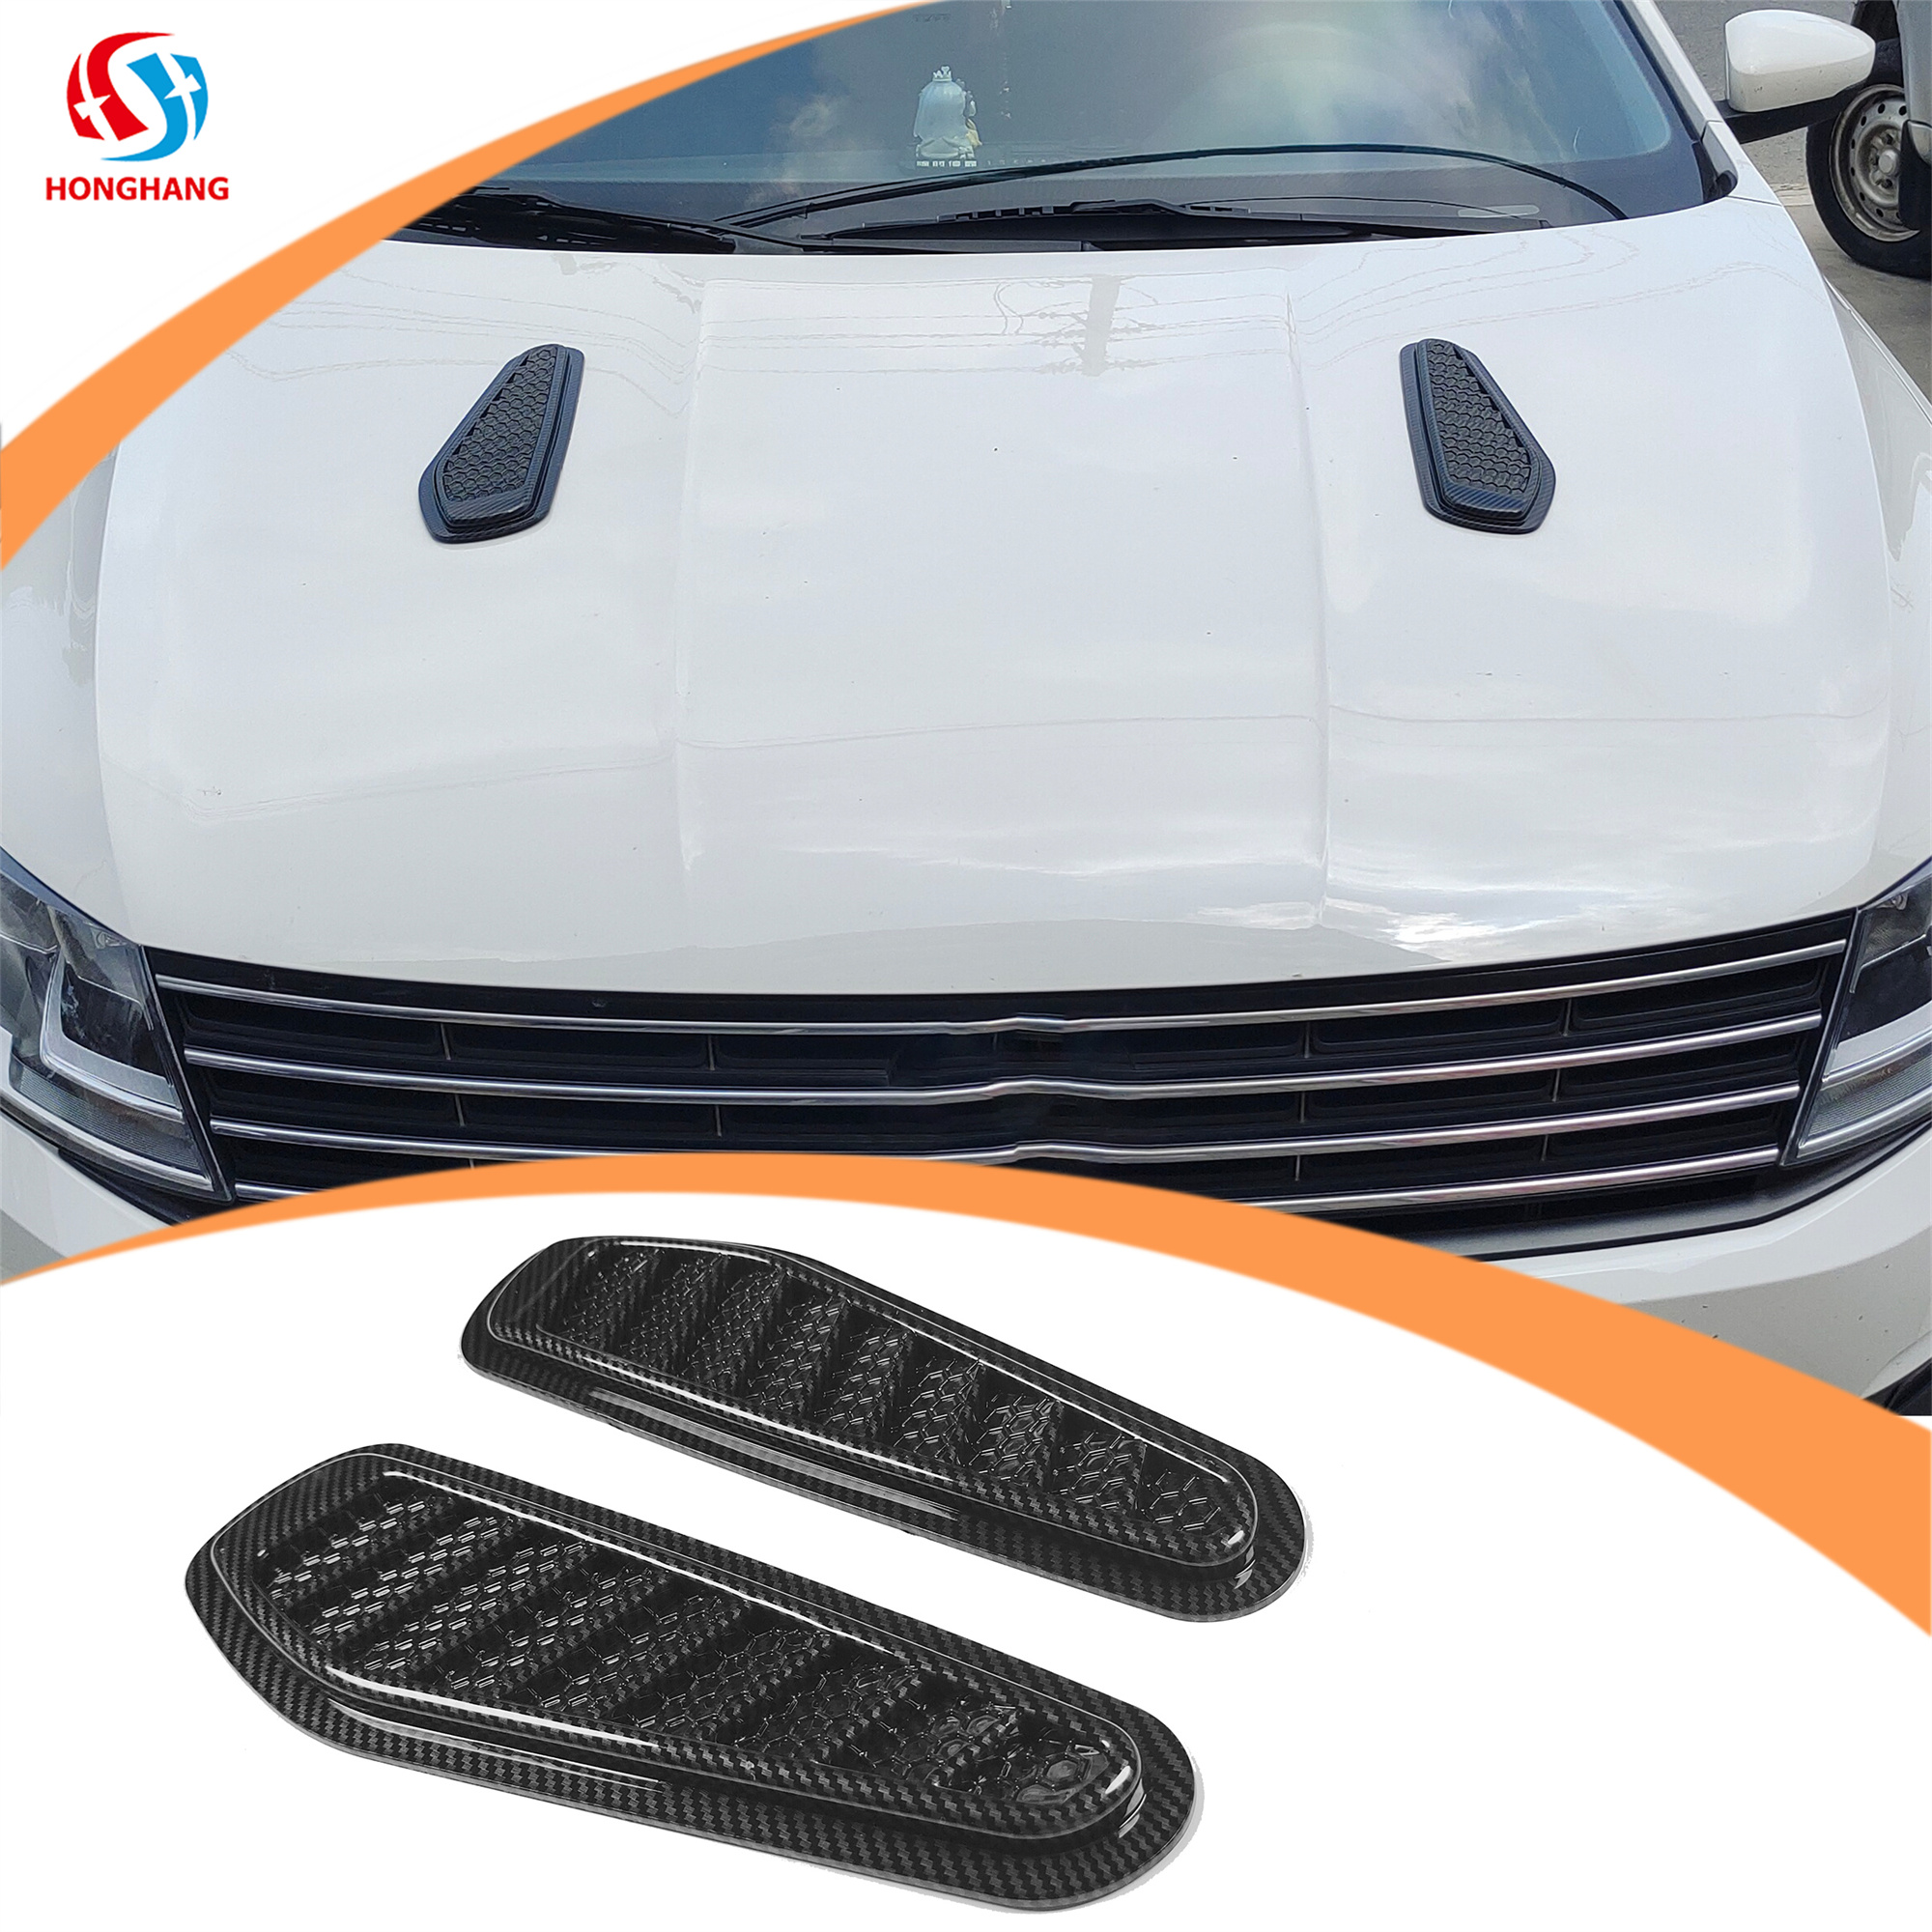 Type A Universal Air Outlet Hood Decoration Accessories For All Cars